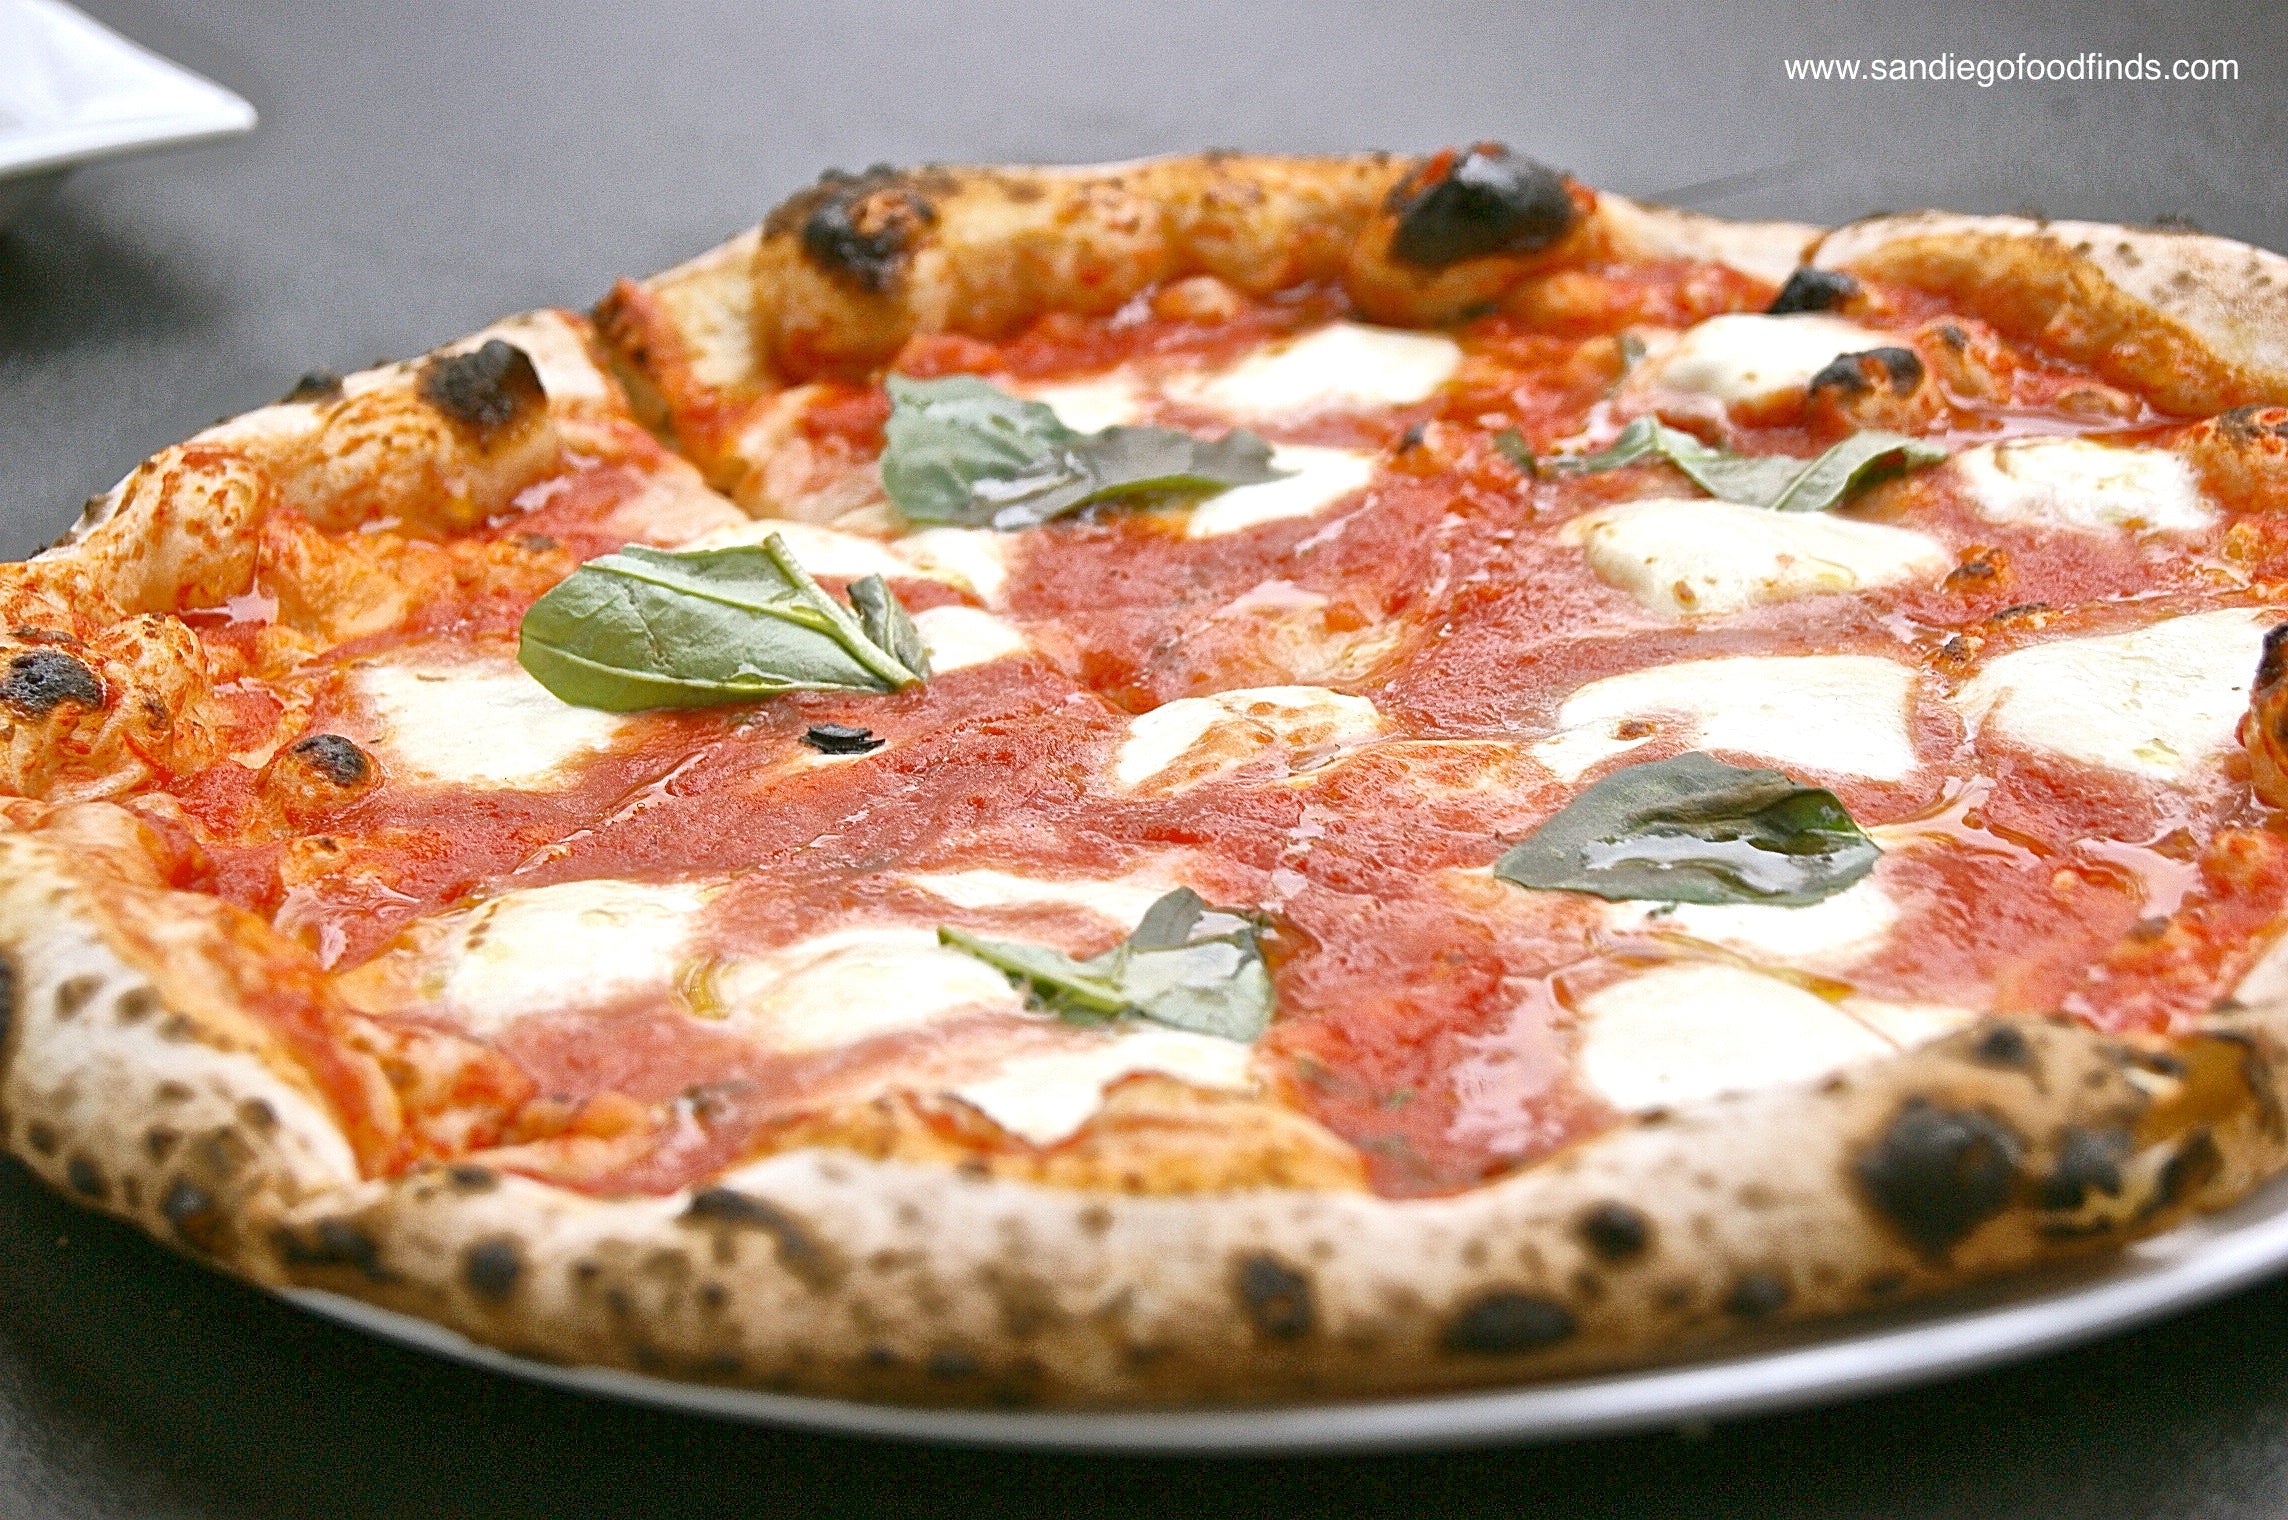 A wood-fired margarita pizza with tomato sauce, mozzarella and fresh basil leaves.